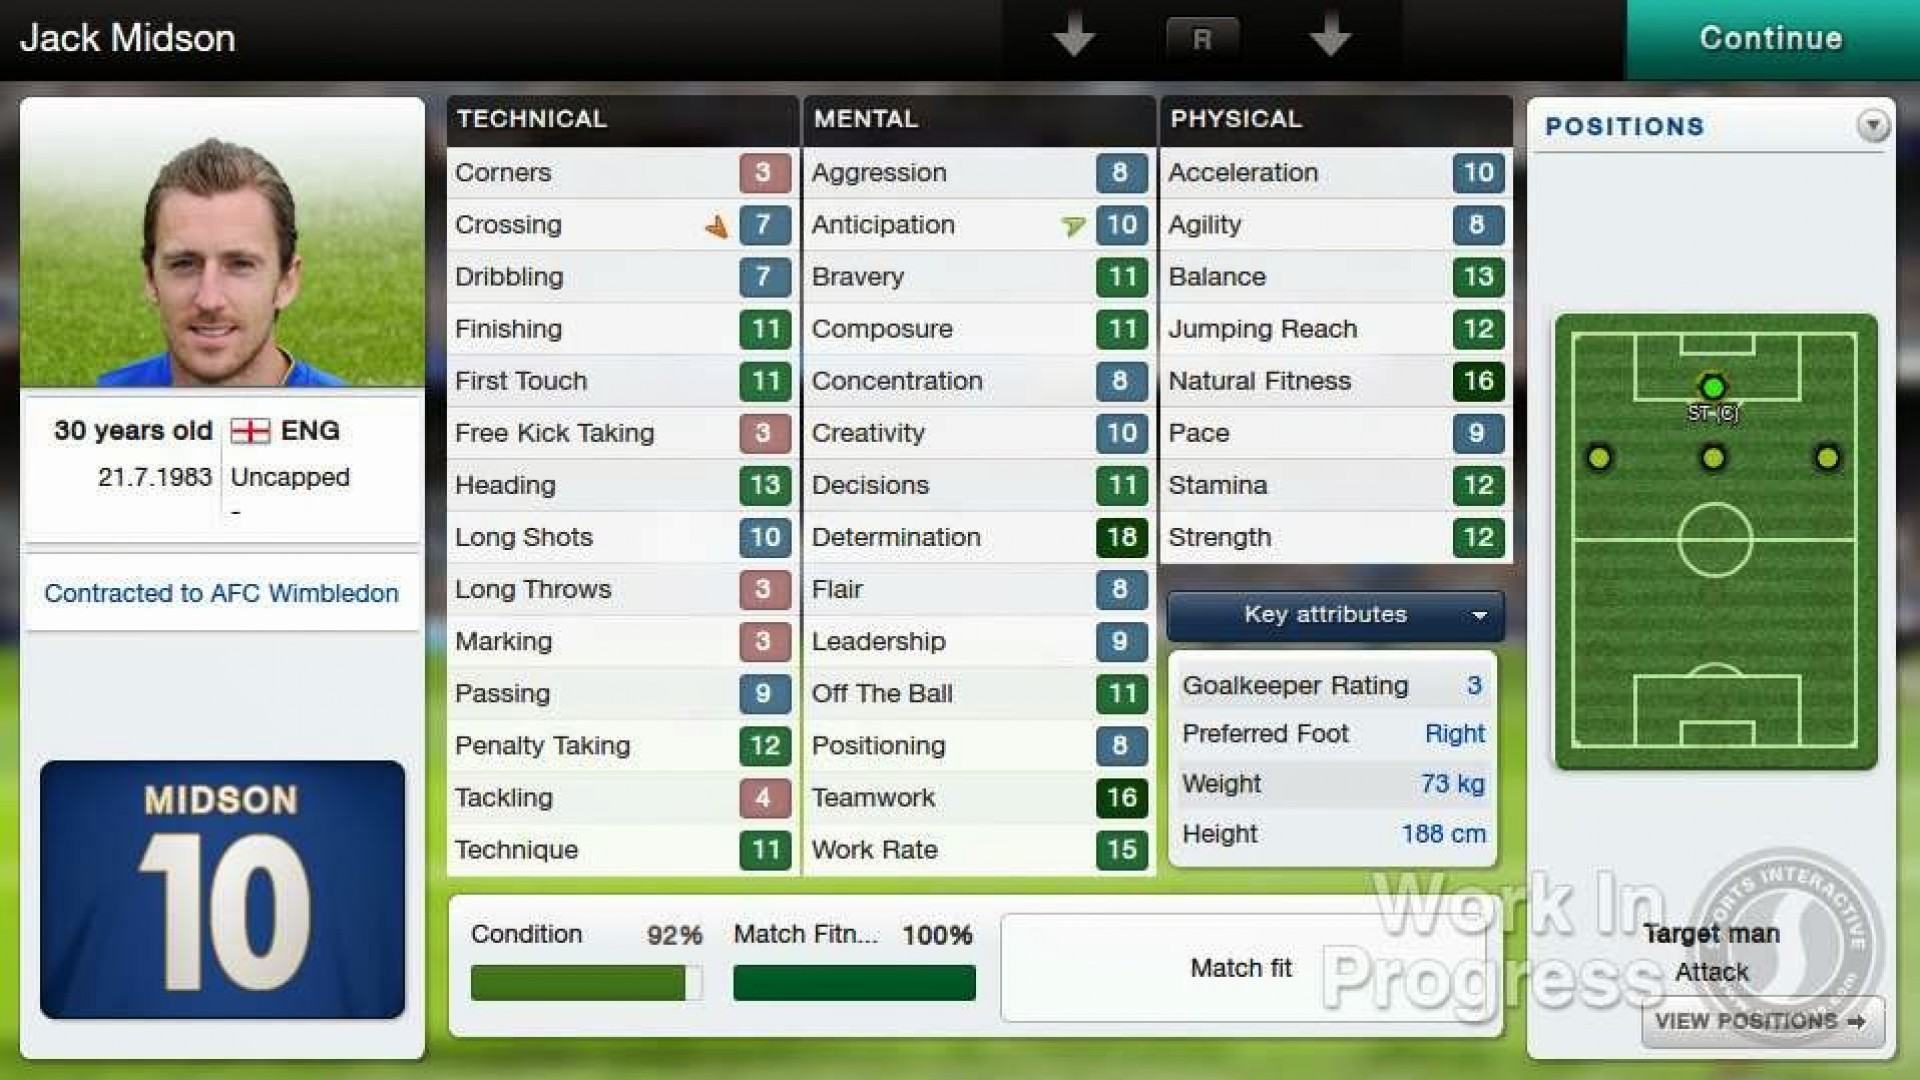 download fifa manager 2014 for free